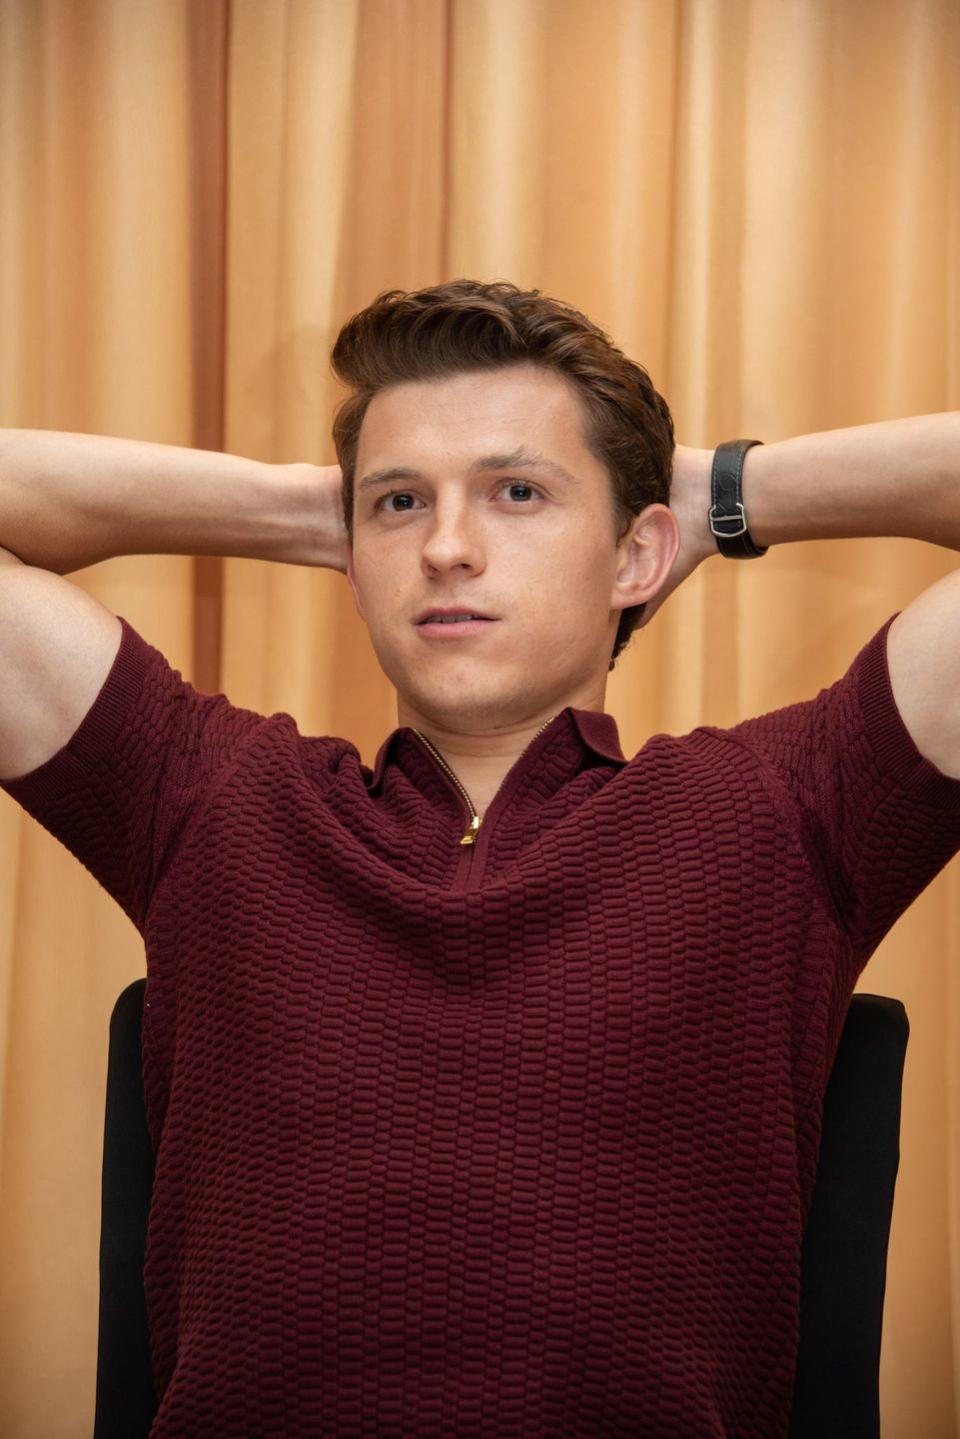 35 Photos of Tom Holland Being Tom Holland Through the Years